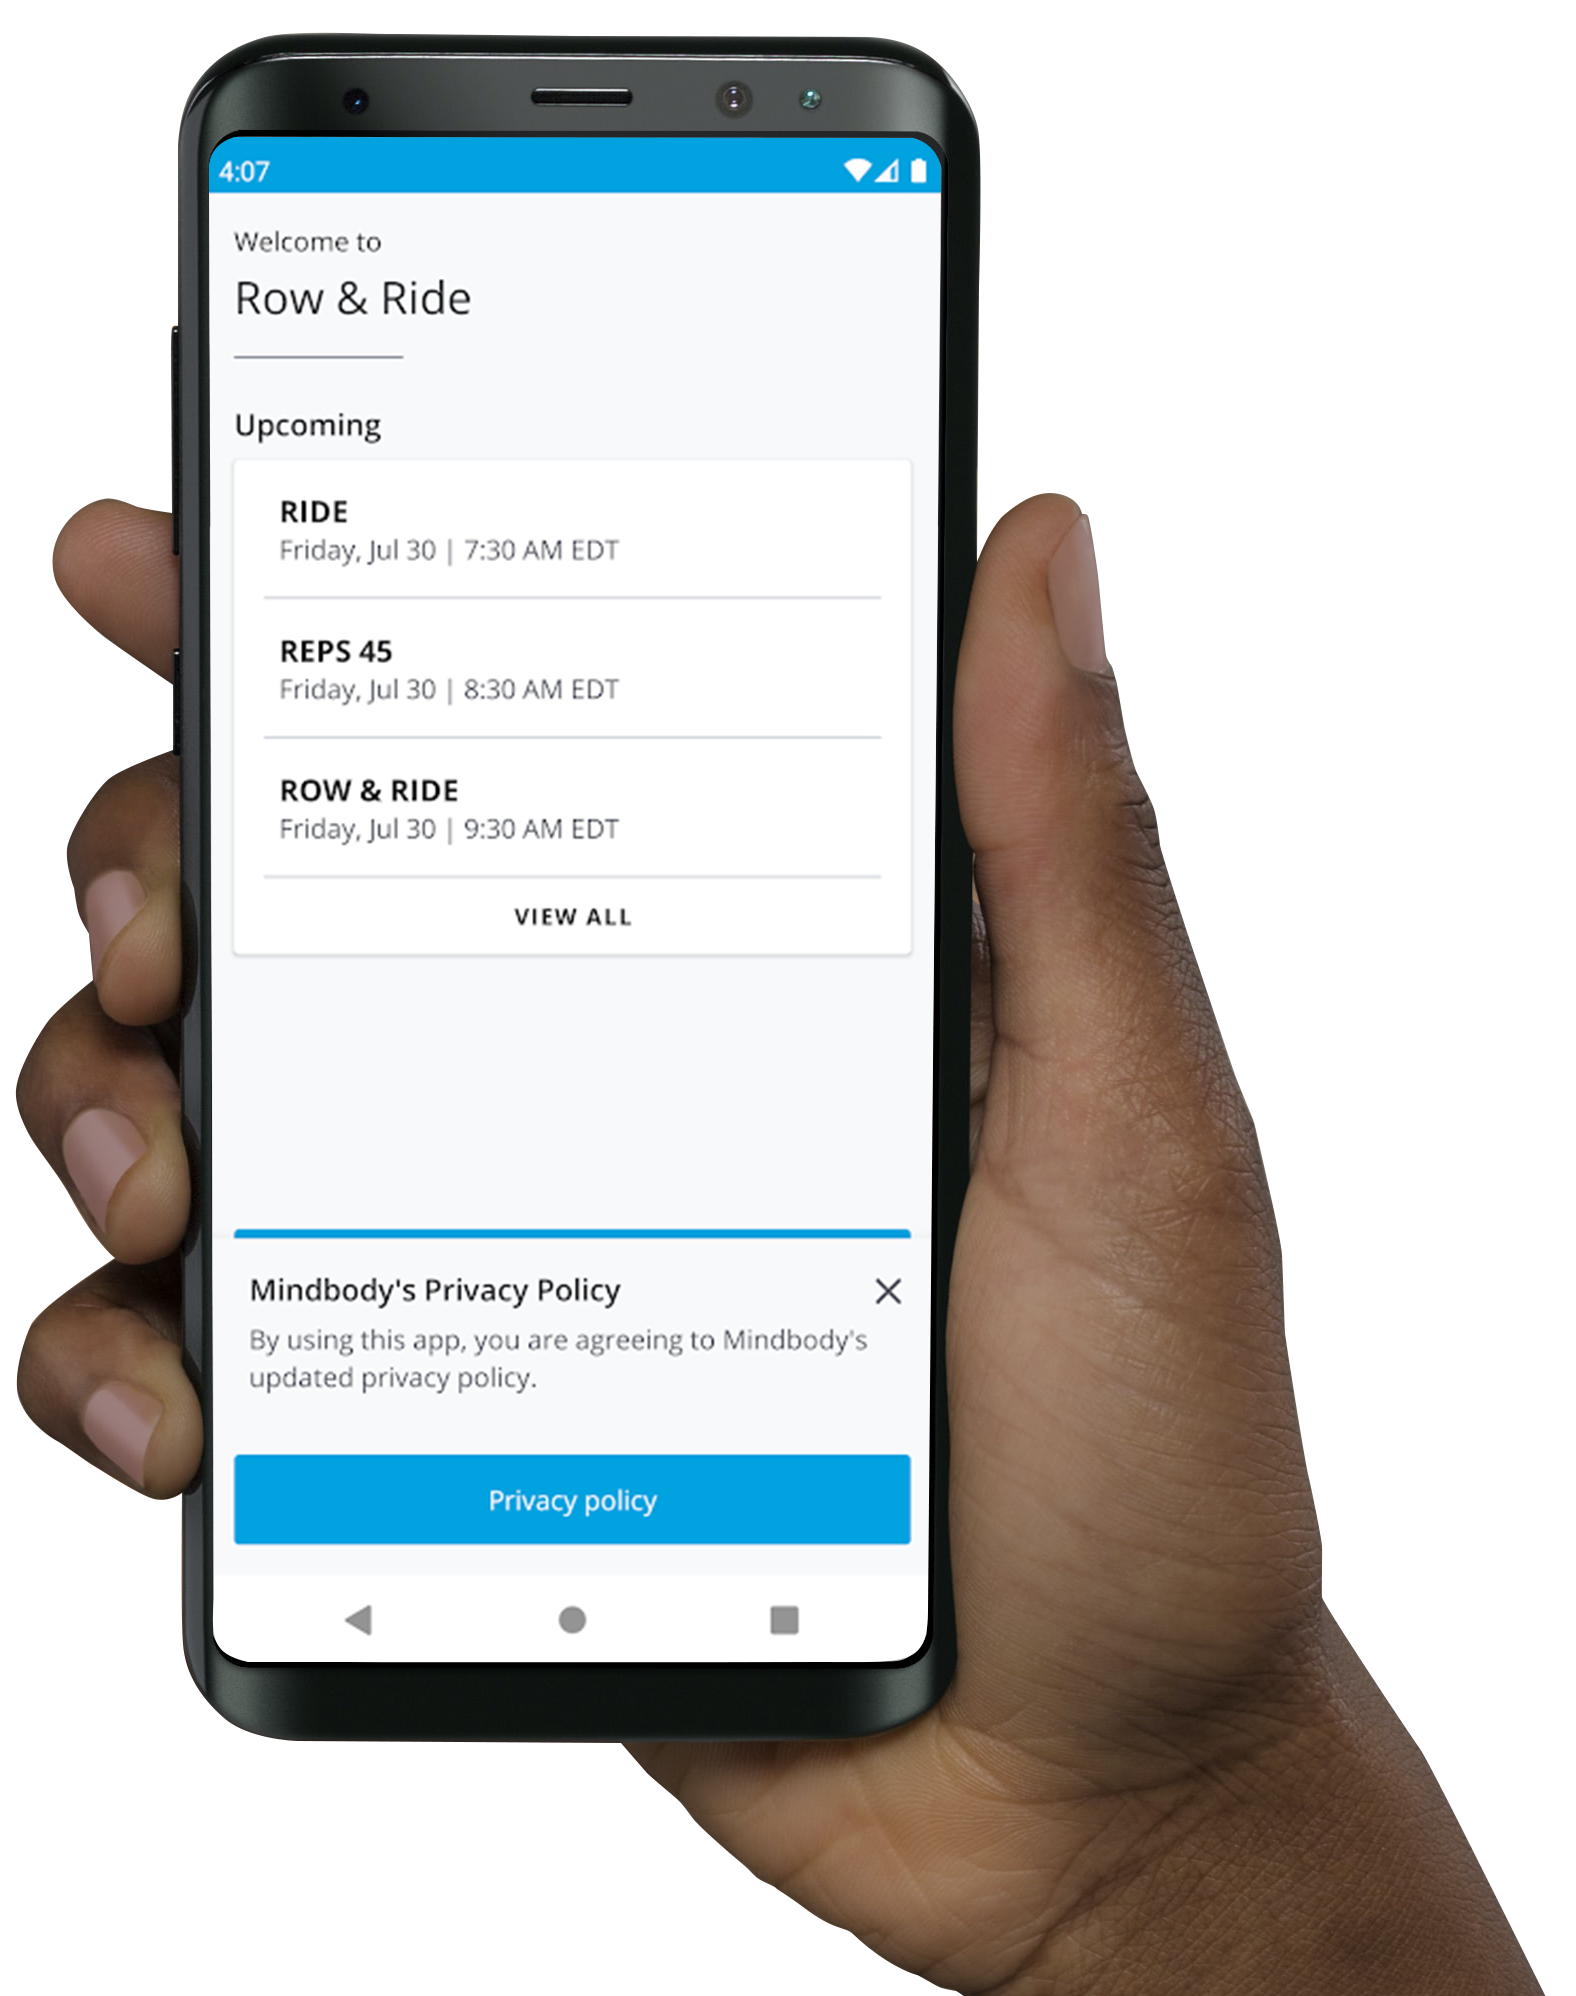 Row and Ride Application Interface on a Phone